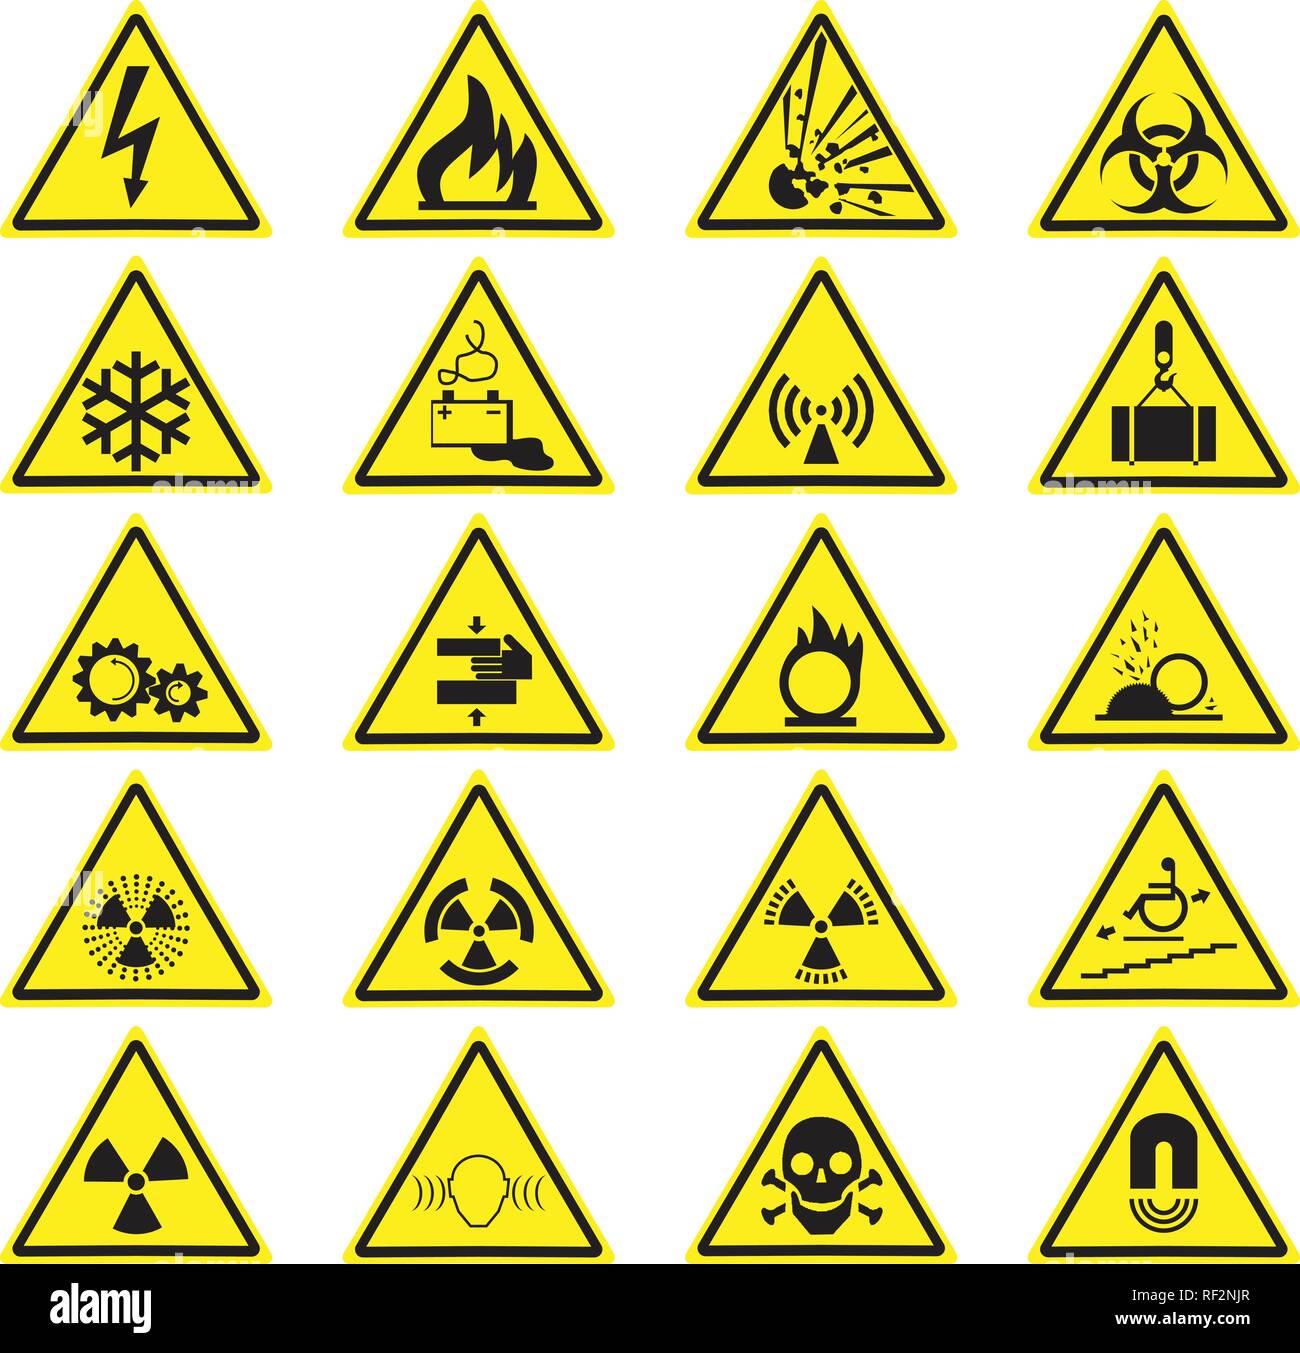 Warning Hazard Yellow Triangle Signs Set. Vector symbols isolated on white. Stock Vector